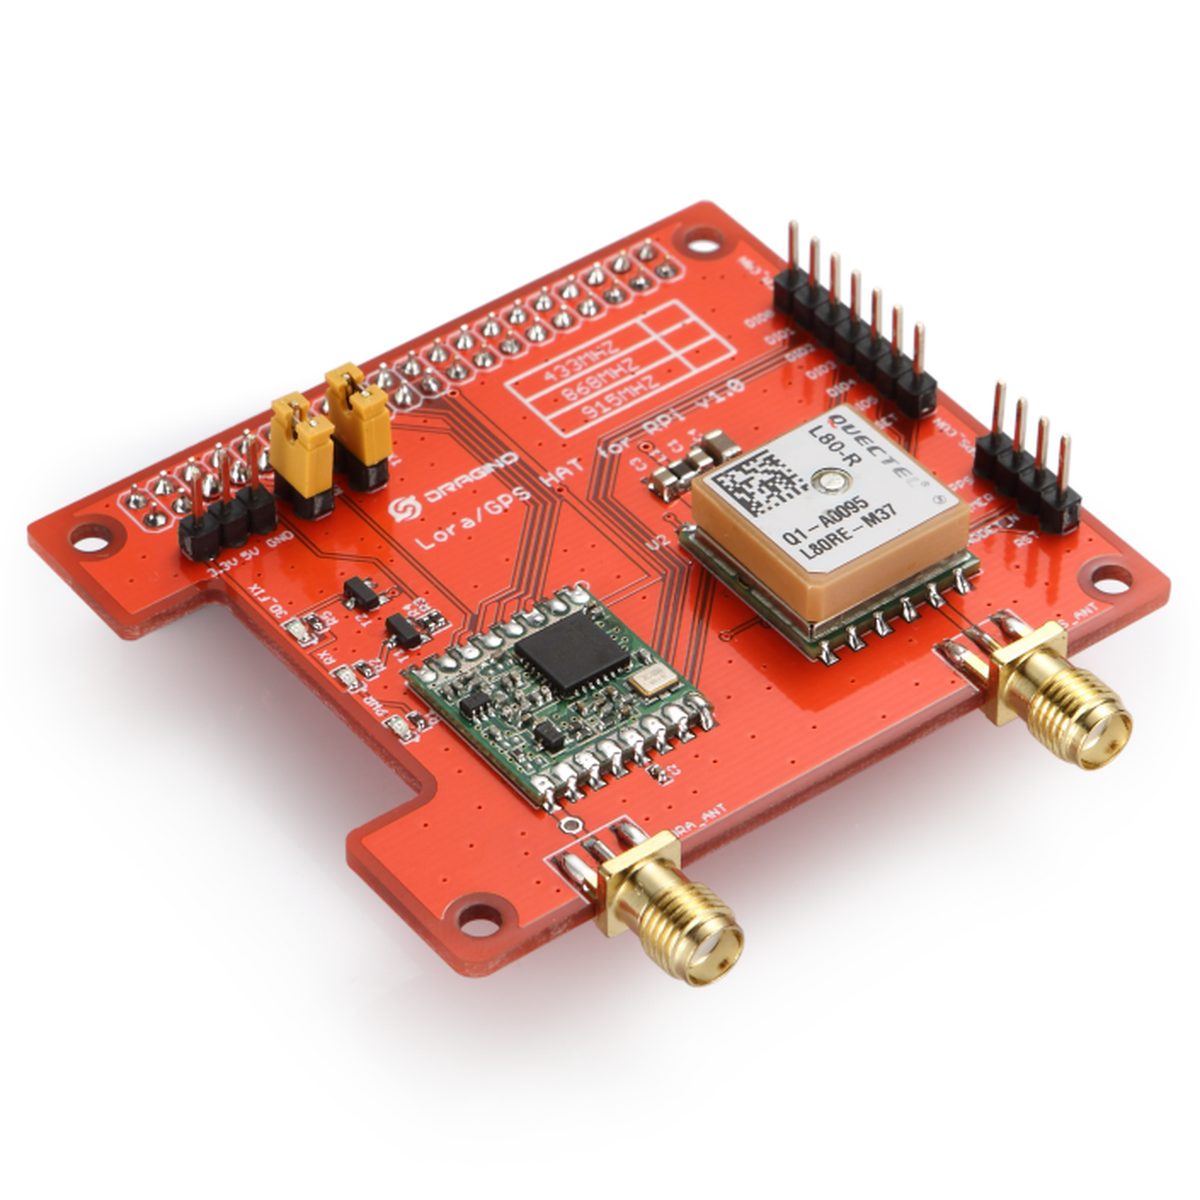 Raspberry Pi HAT featuring GPS and DRAGINO TECH on Tindie